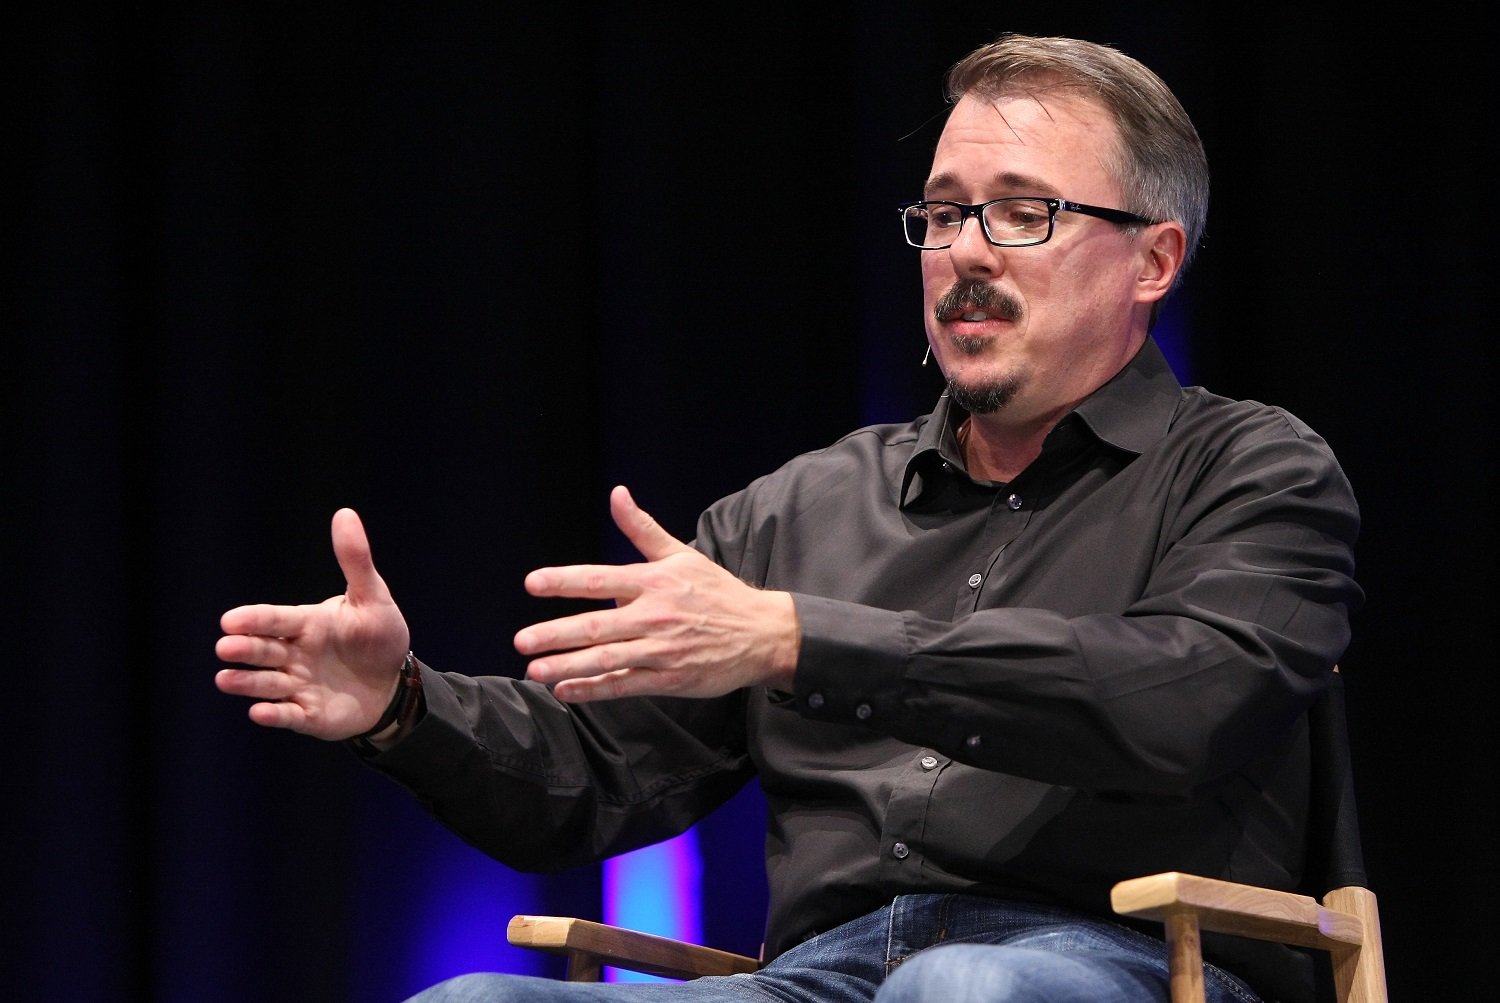 Vince Gilligan worked on The Lone Gunmen